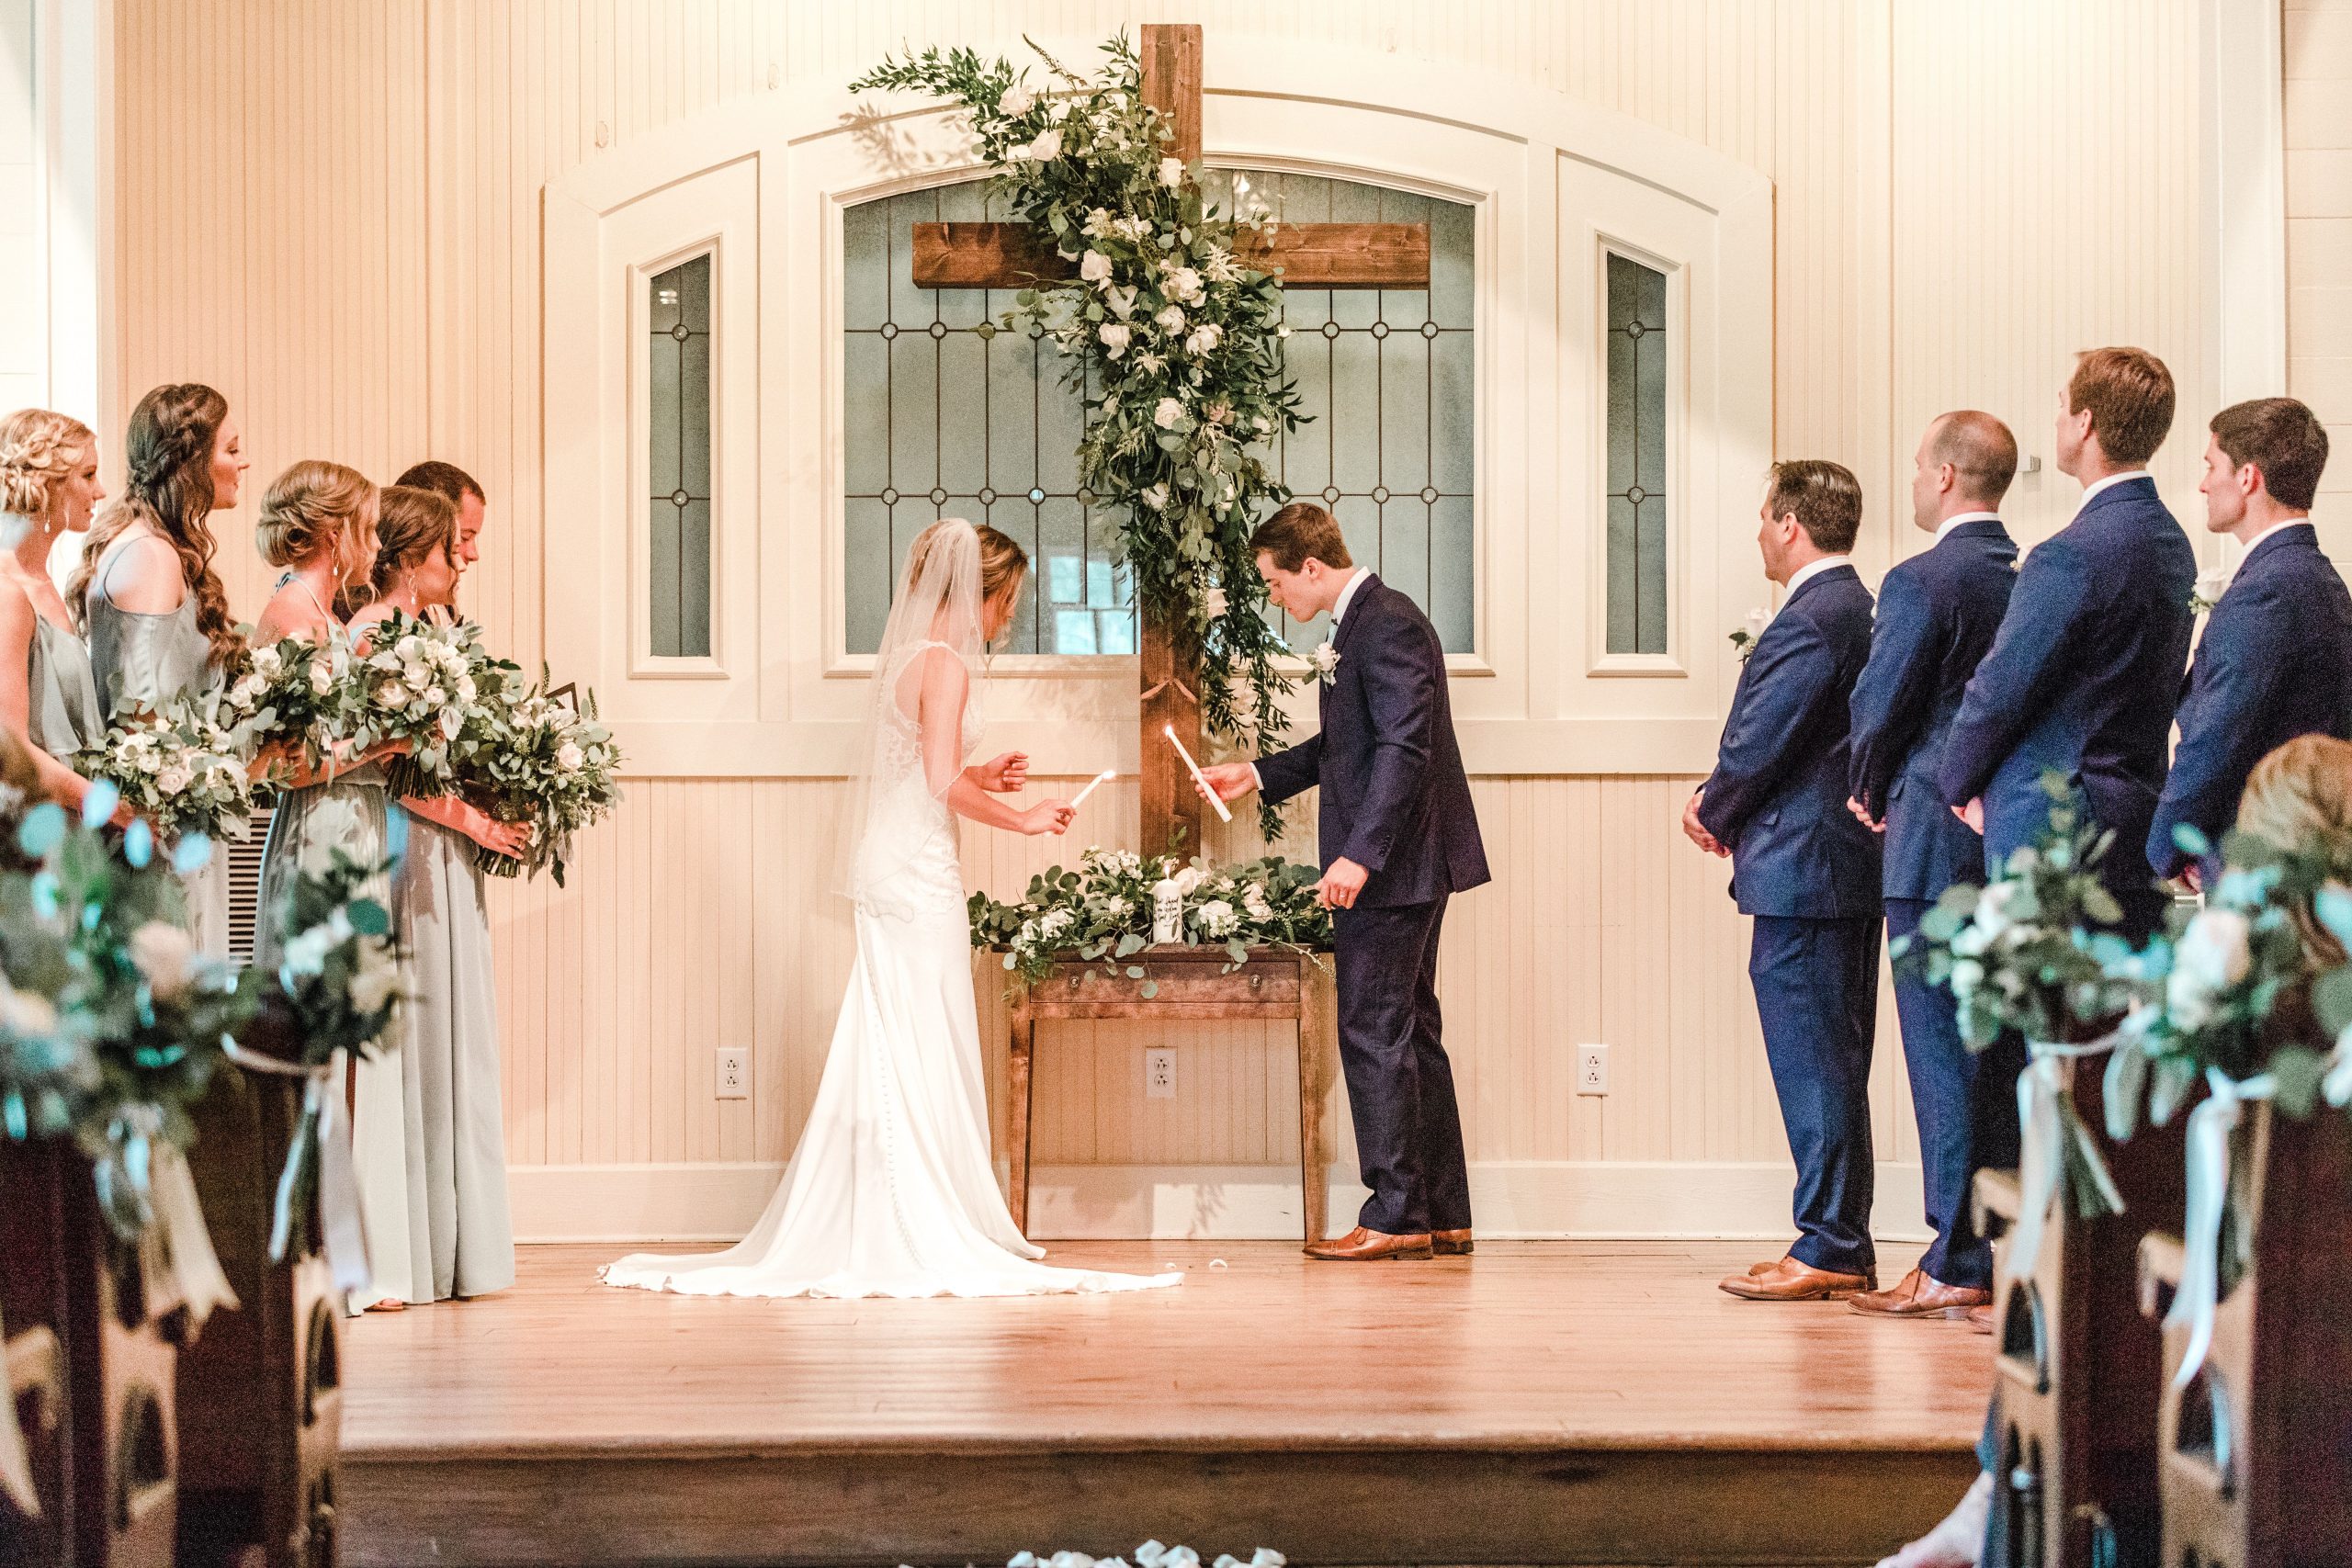 How Much Does It Cost To Get Married In A Chapel